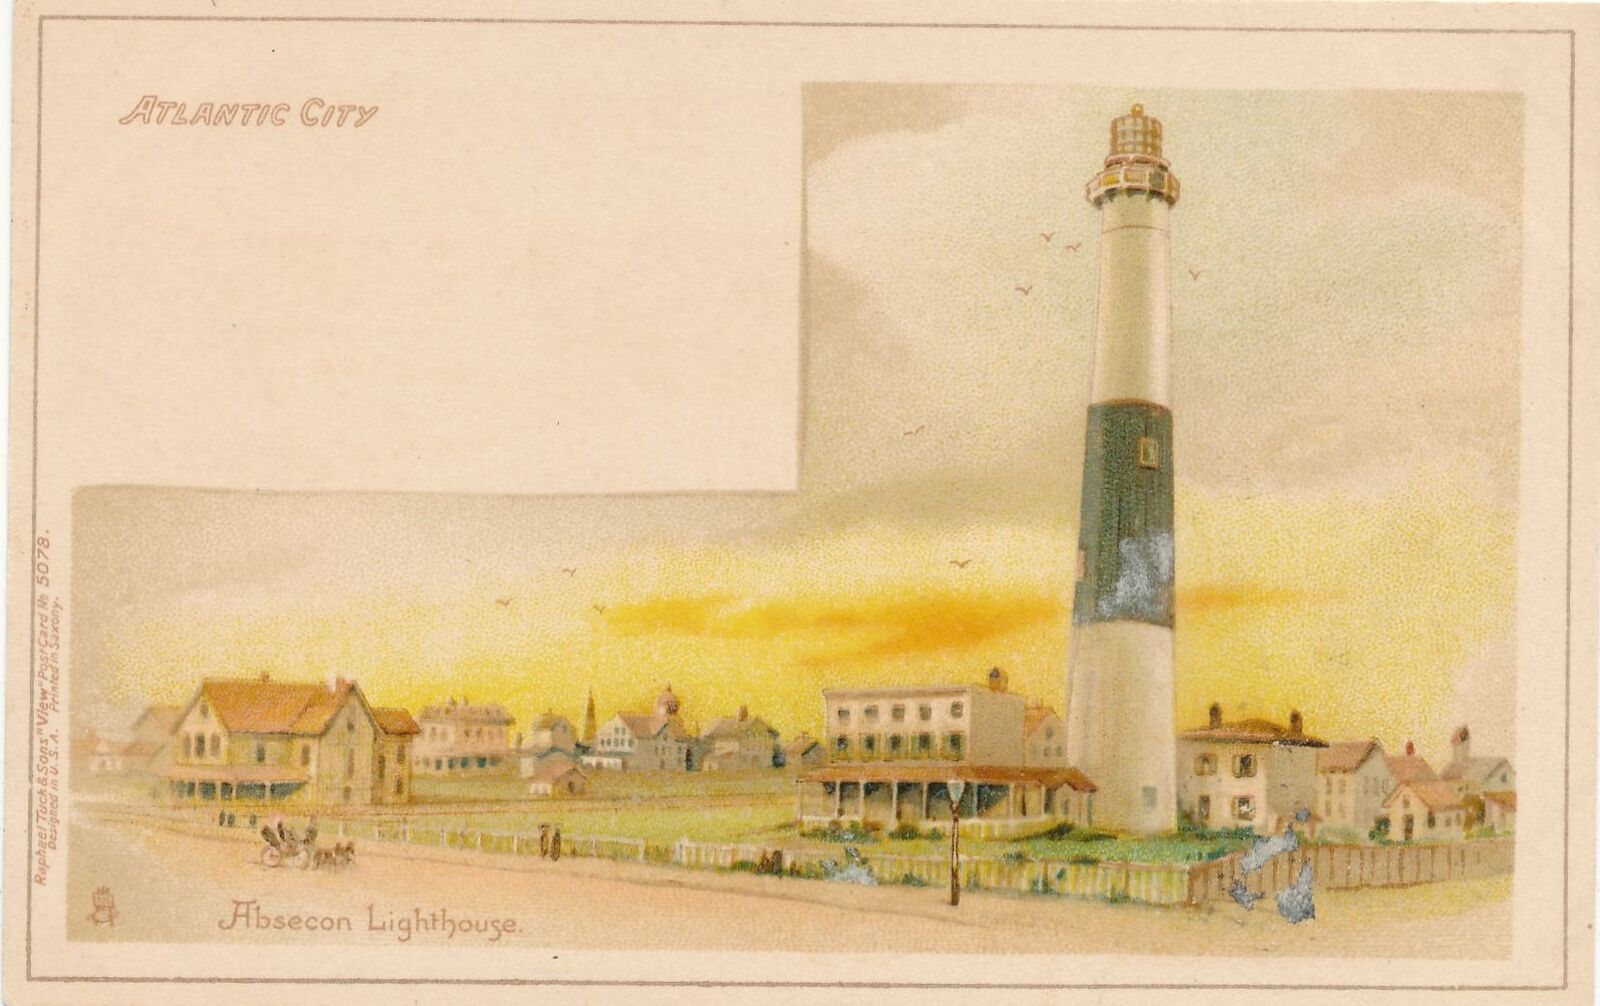 ATLANTIC CITY NJ - Absecon Lighthouse Tuck Private Mailing Card (1898-1901)